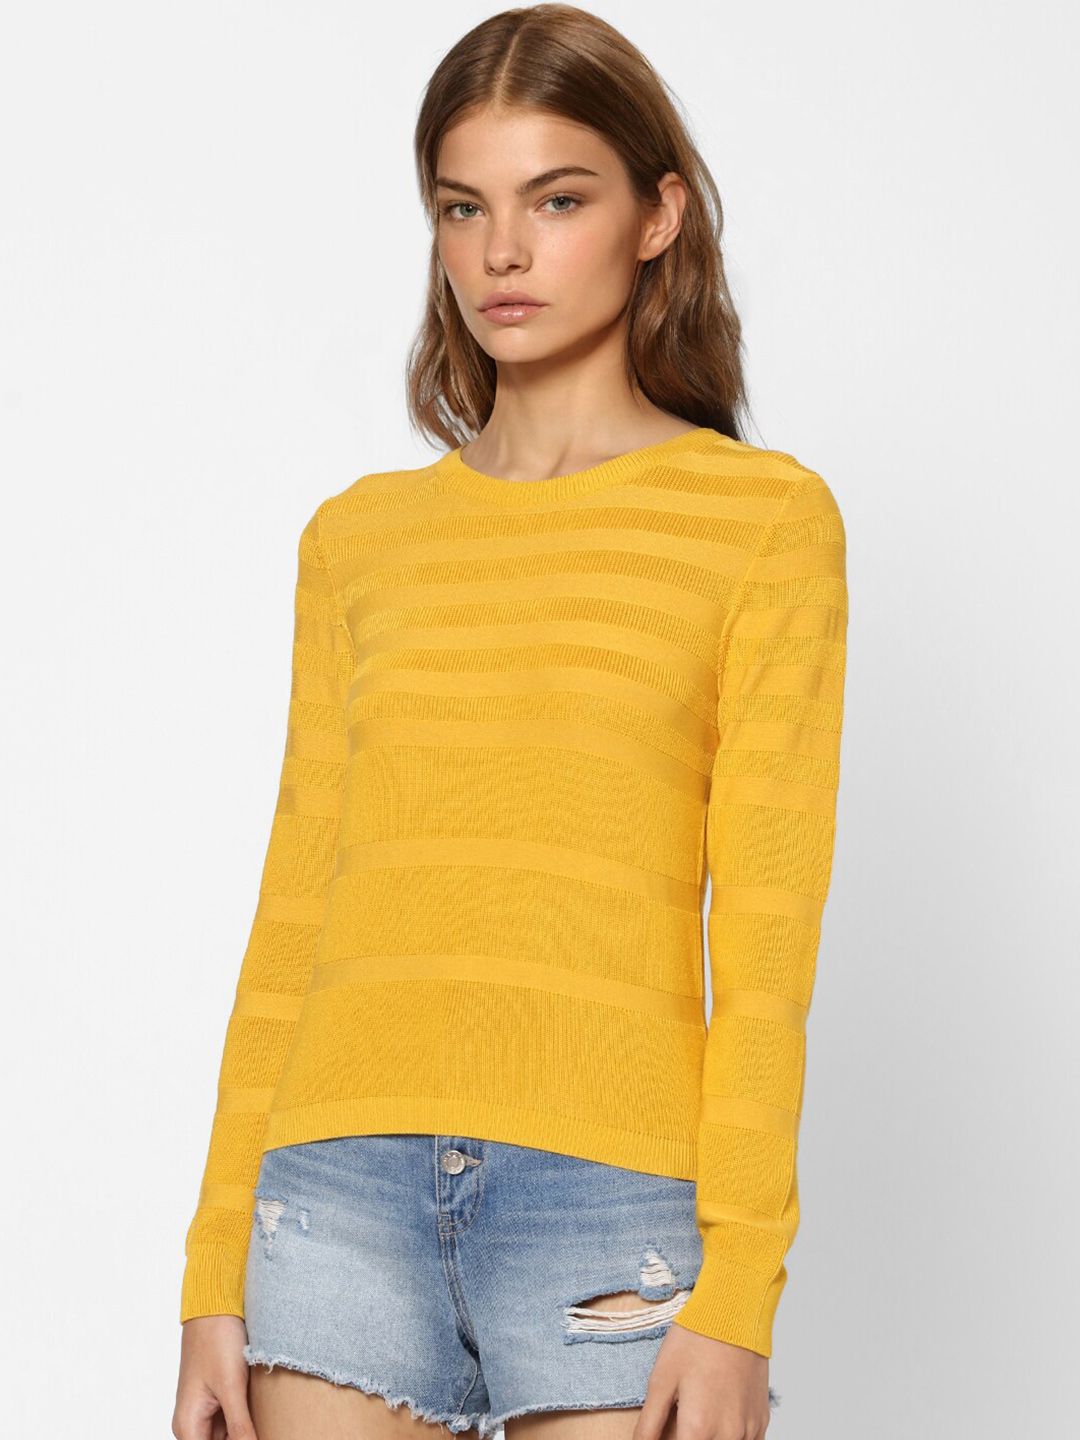 ONLY Women Yellow Striped Pullover Price in India